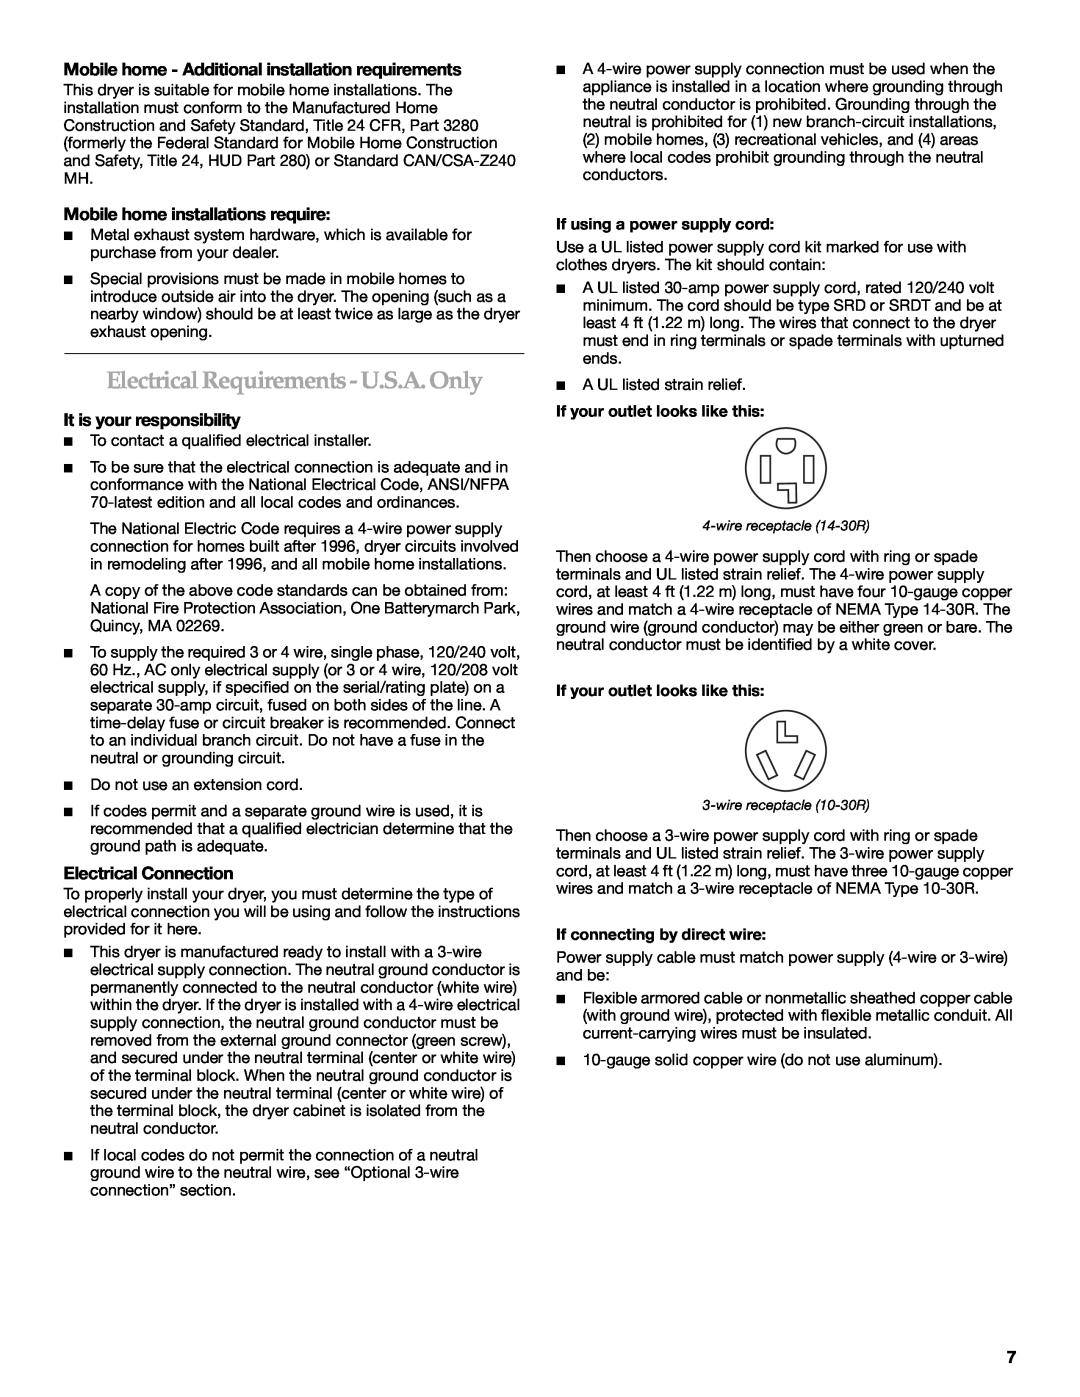 Maytag W10099070 manual ElectricalRequirements- U.S.A. Only, Mobile home - Additional installation requirements 